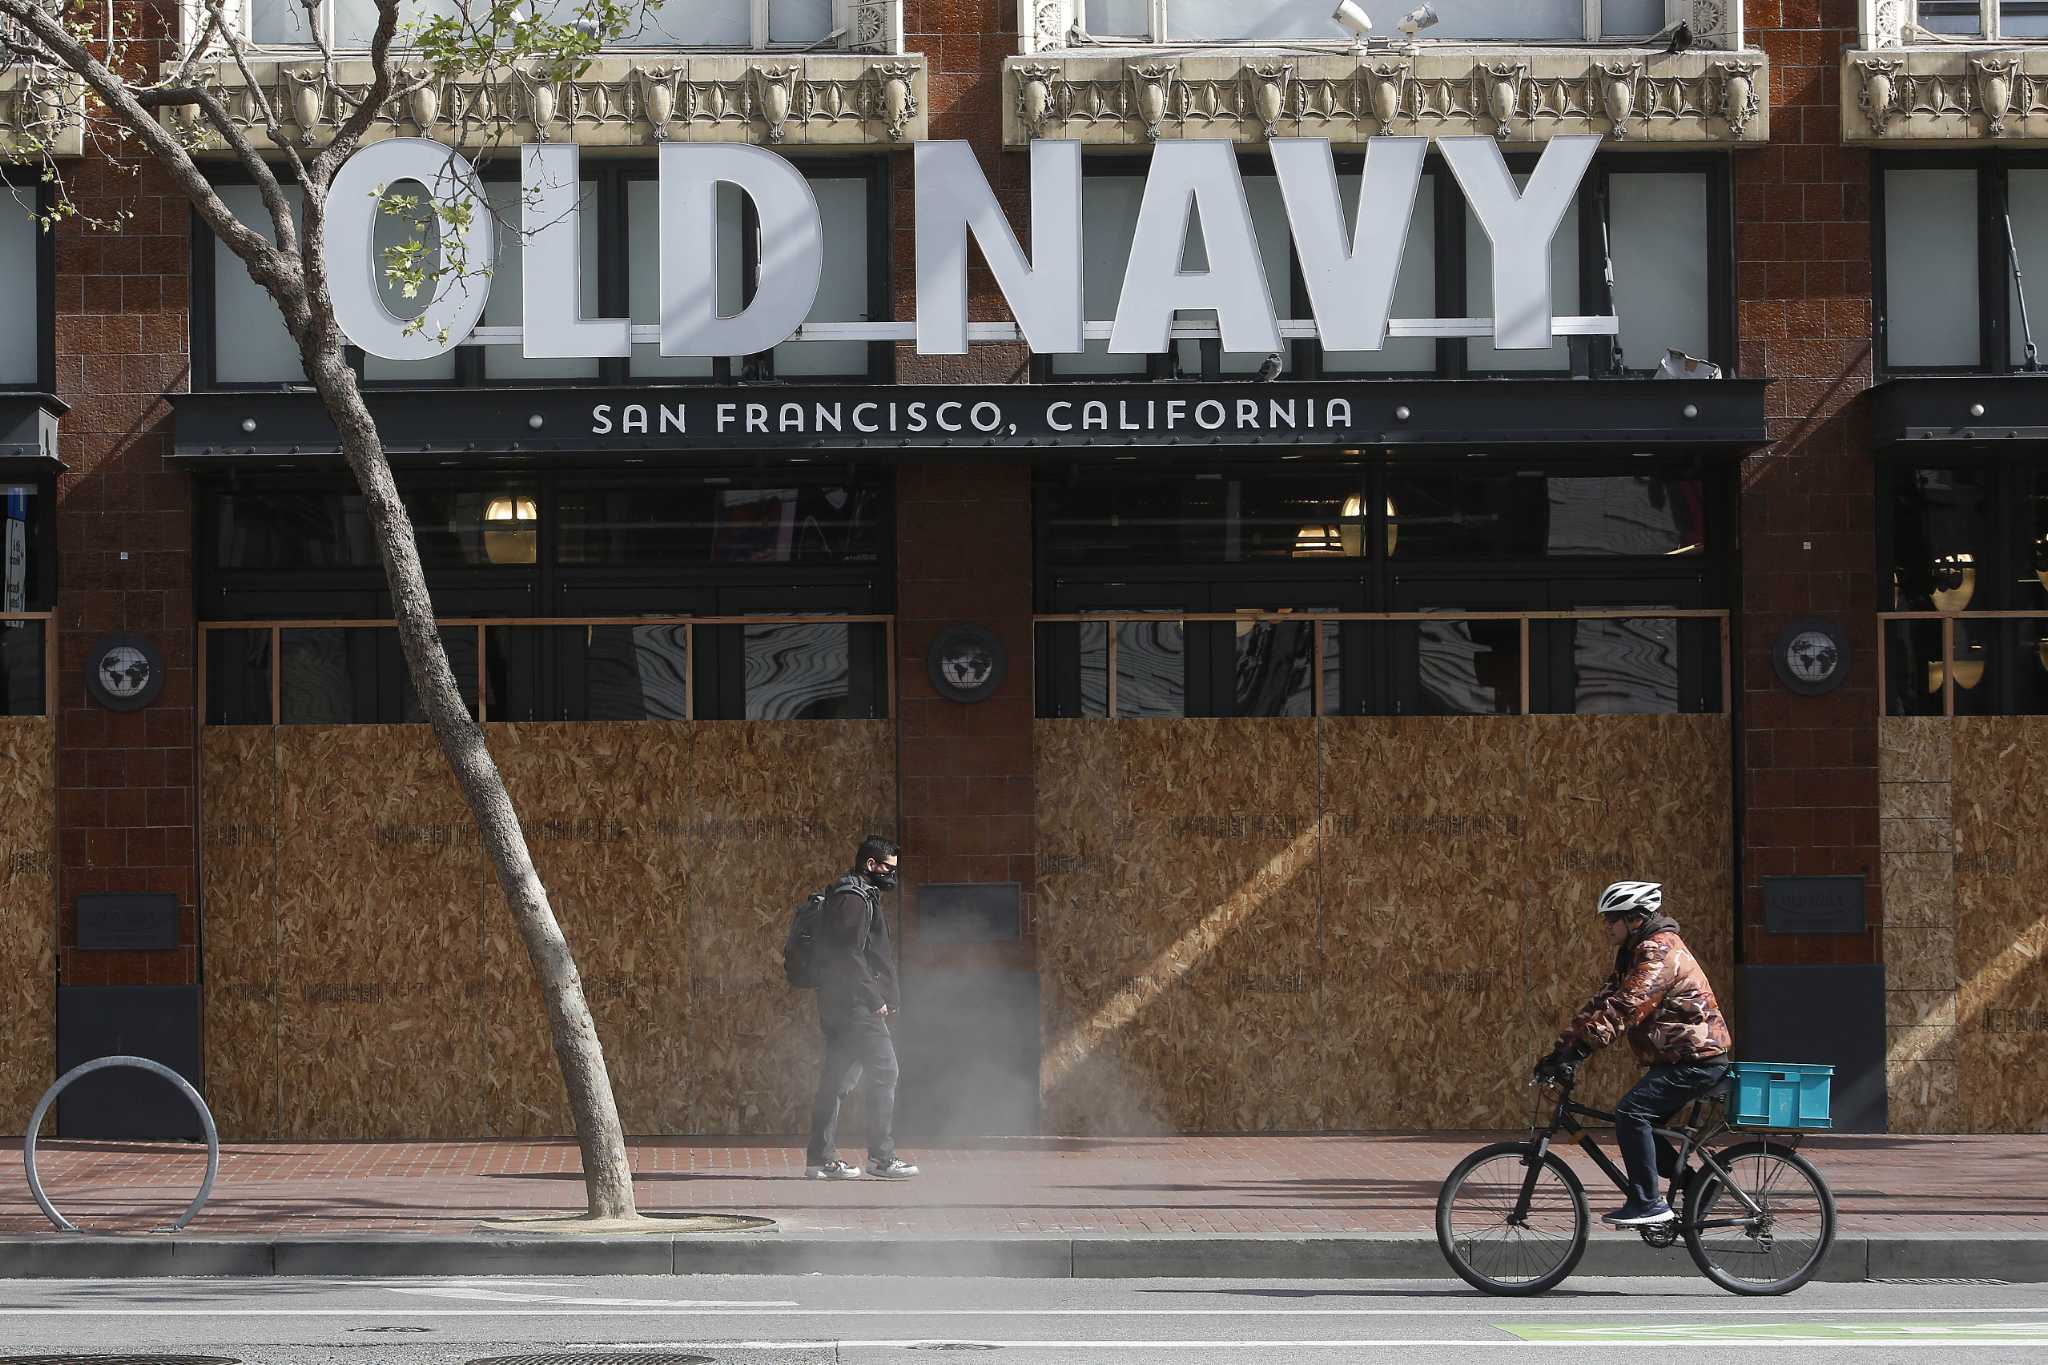 Old Navy is closing its downtown SF store after decades.